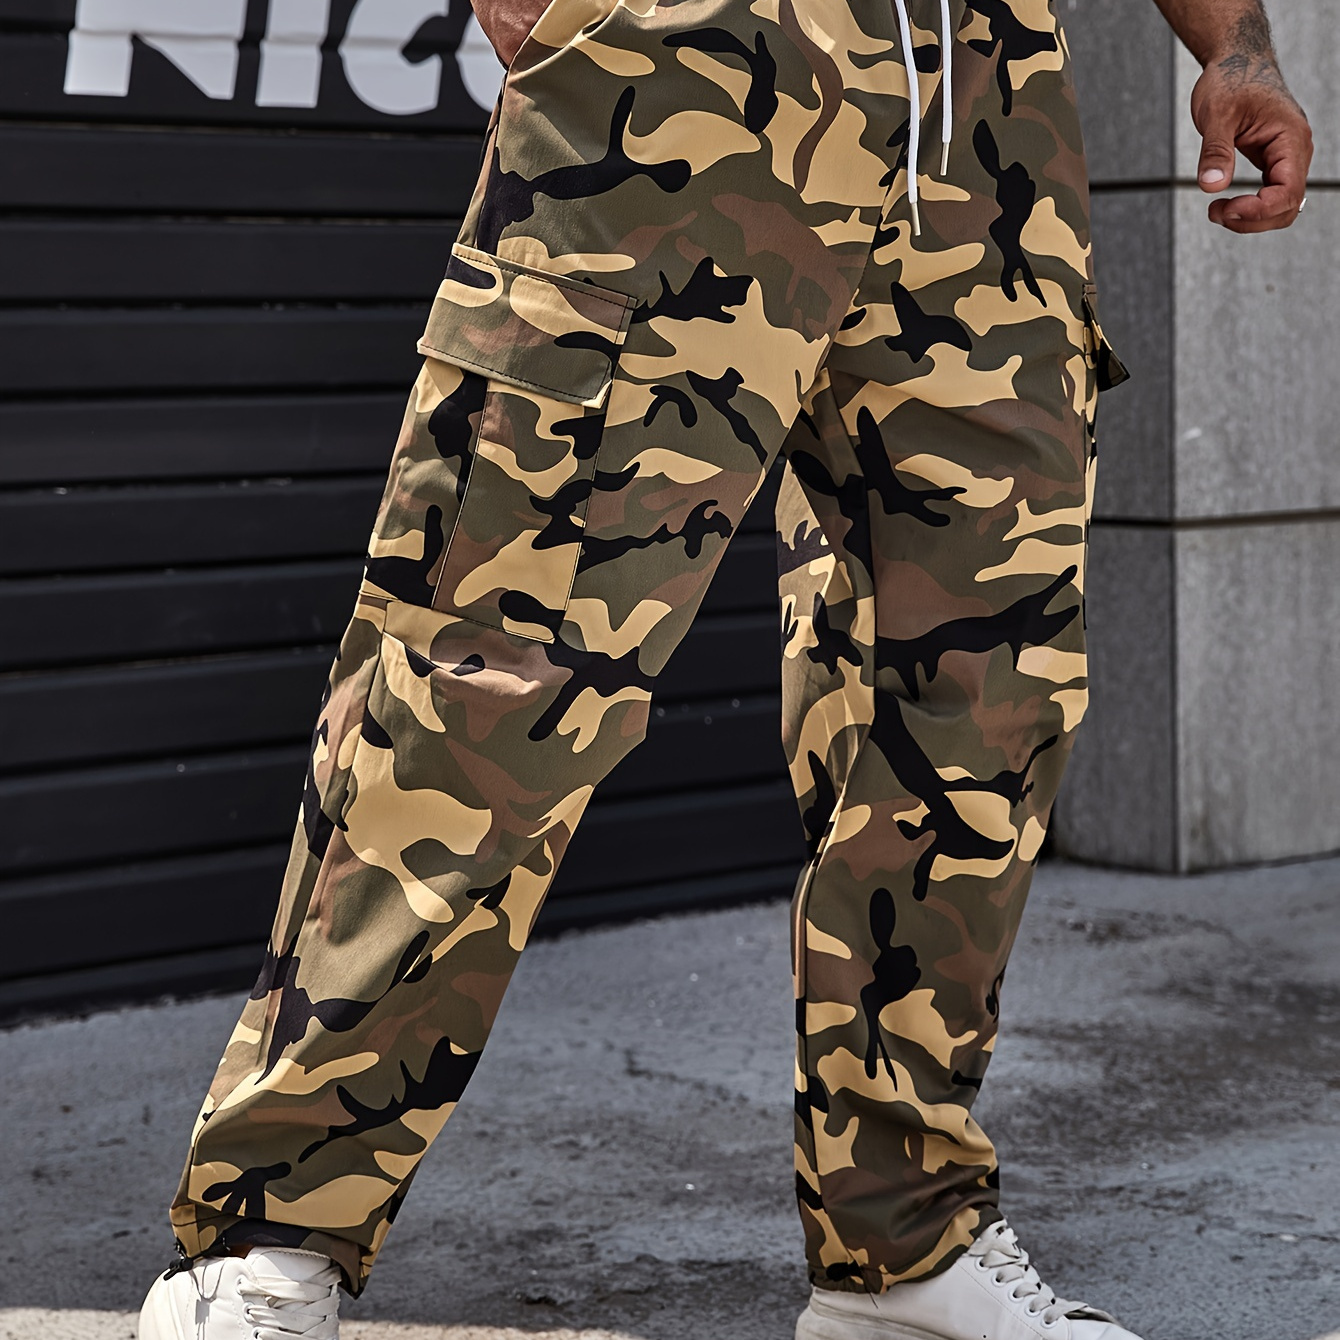 

Plus Size Men's Camouflage Cargo Pants Spring Fall Winter Pants For Sports Outdoor, Men's Clothing